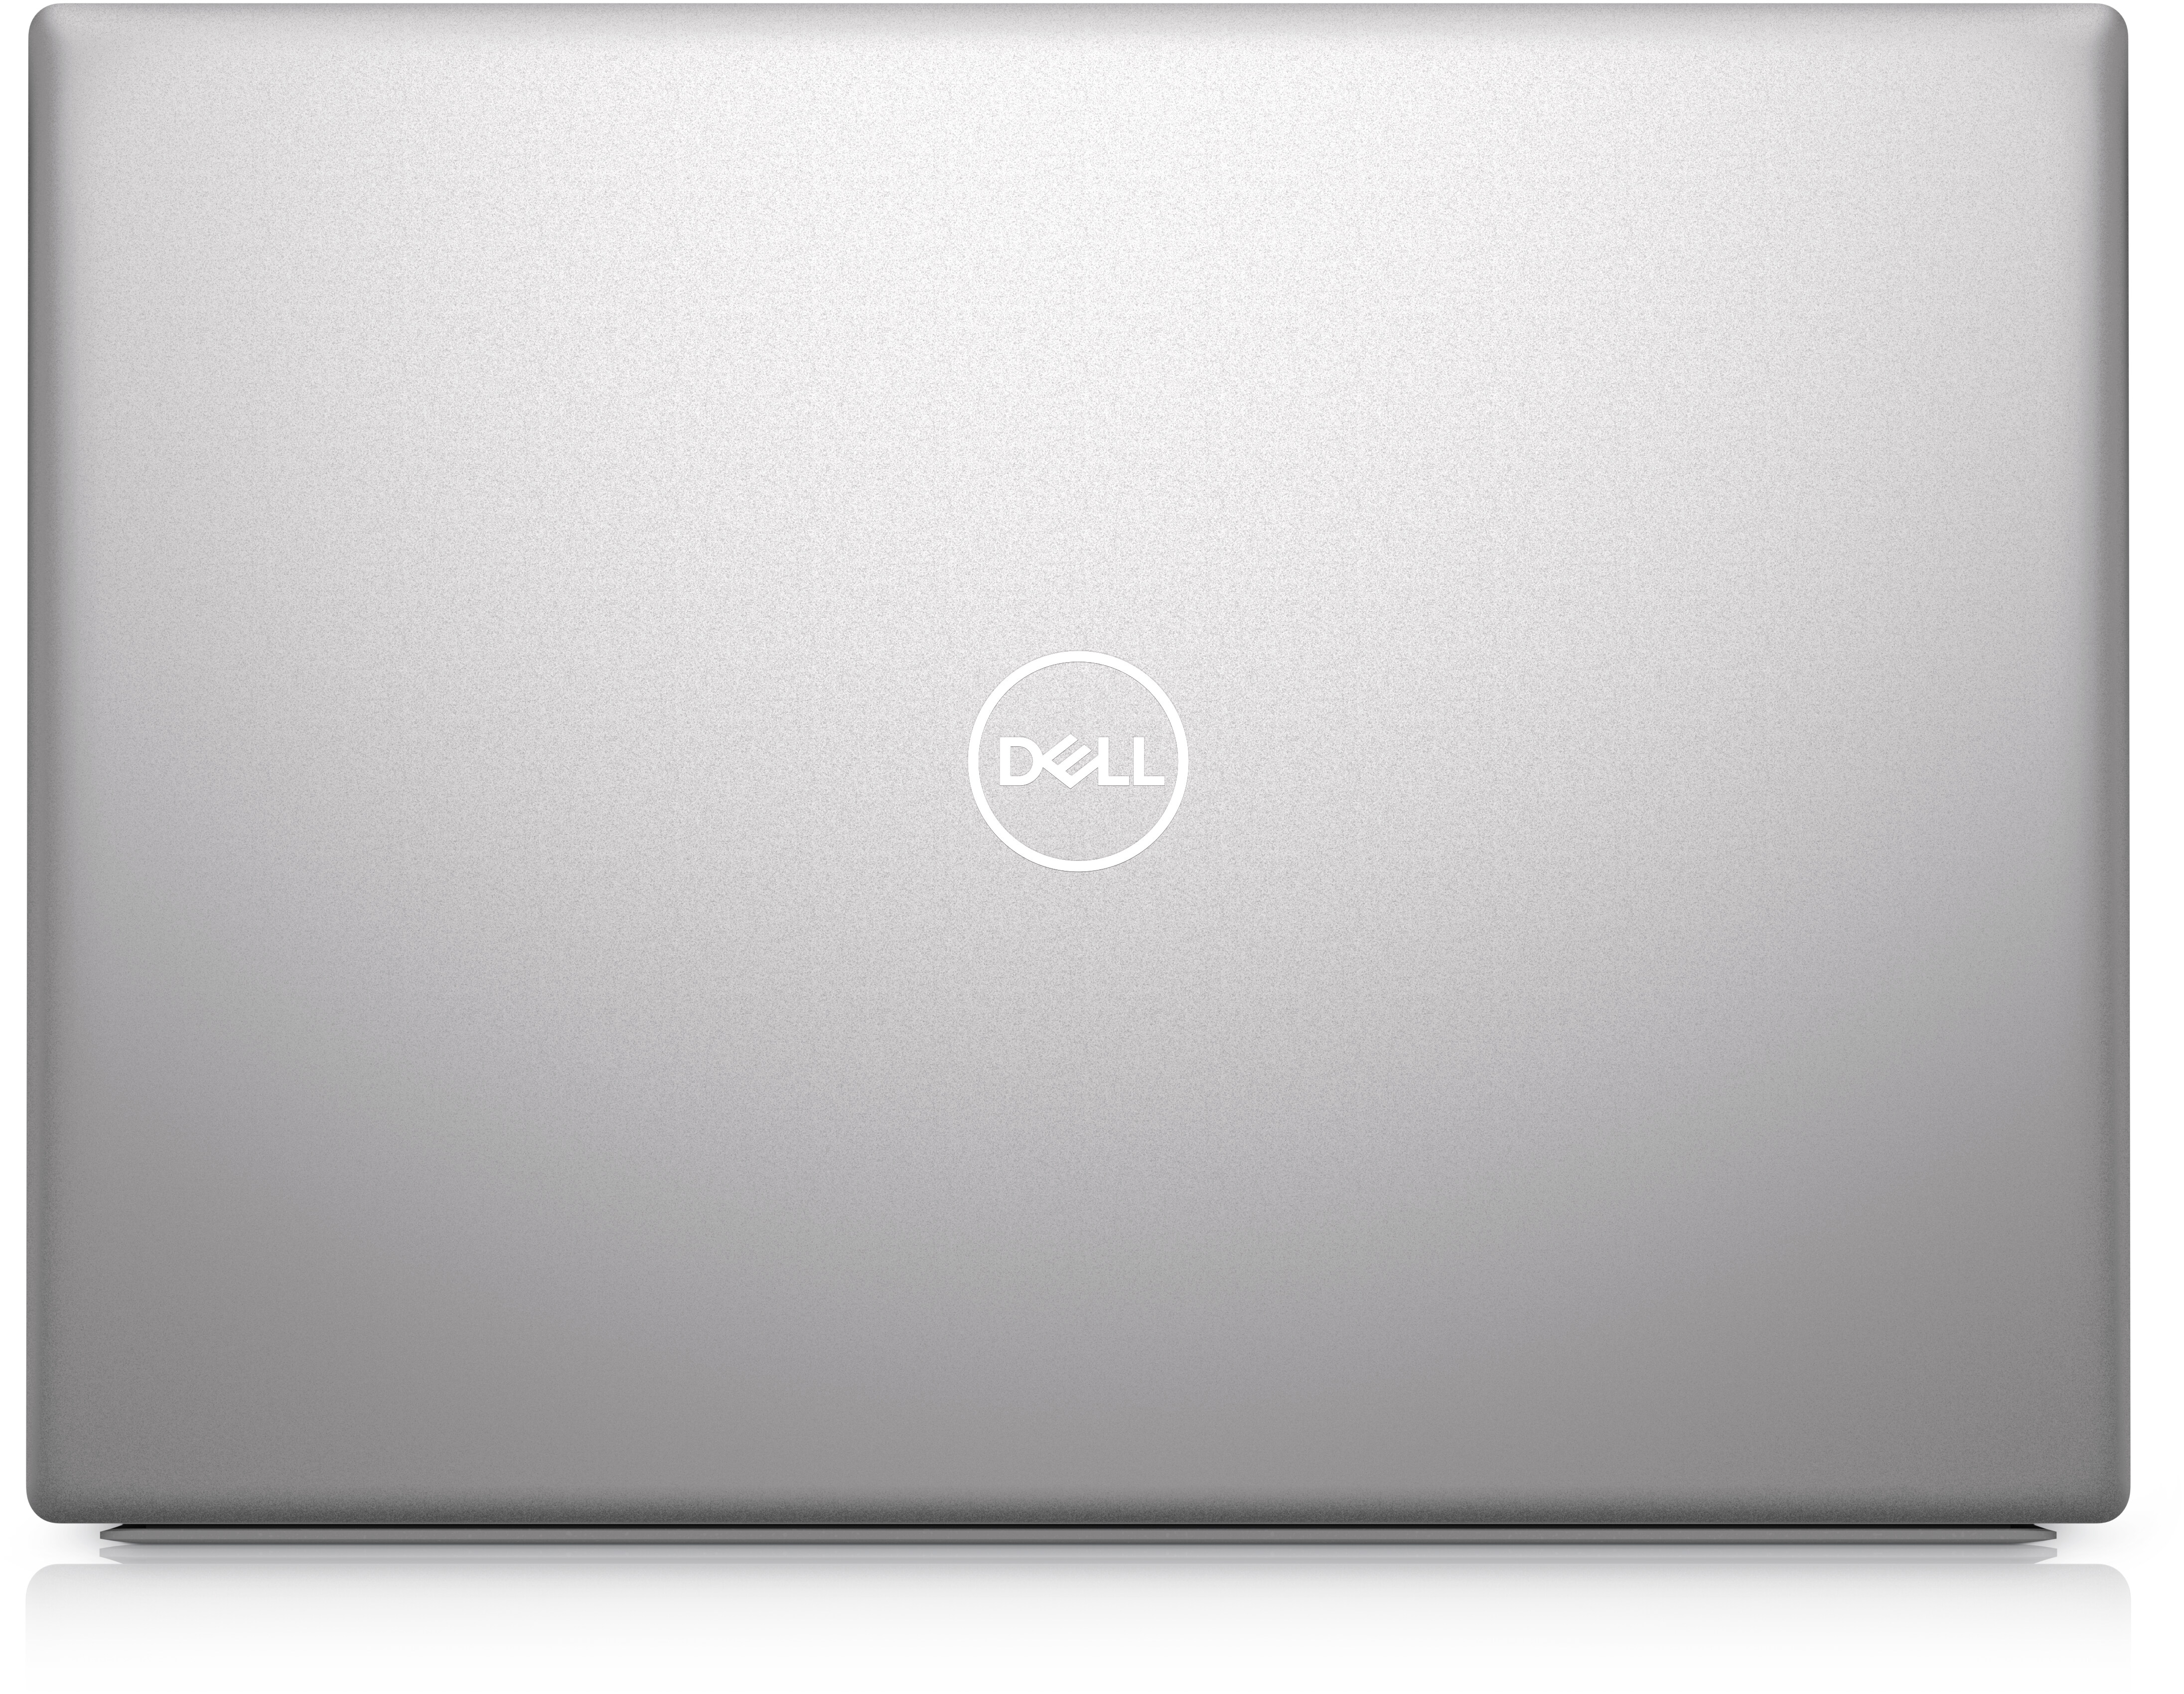 Inspiron 14-inch Laptop with AMD Mobile Processor | Dell Canada